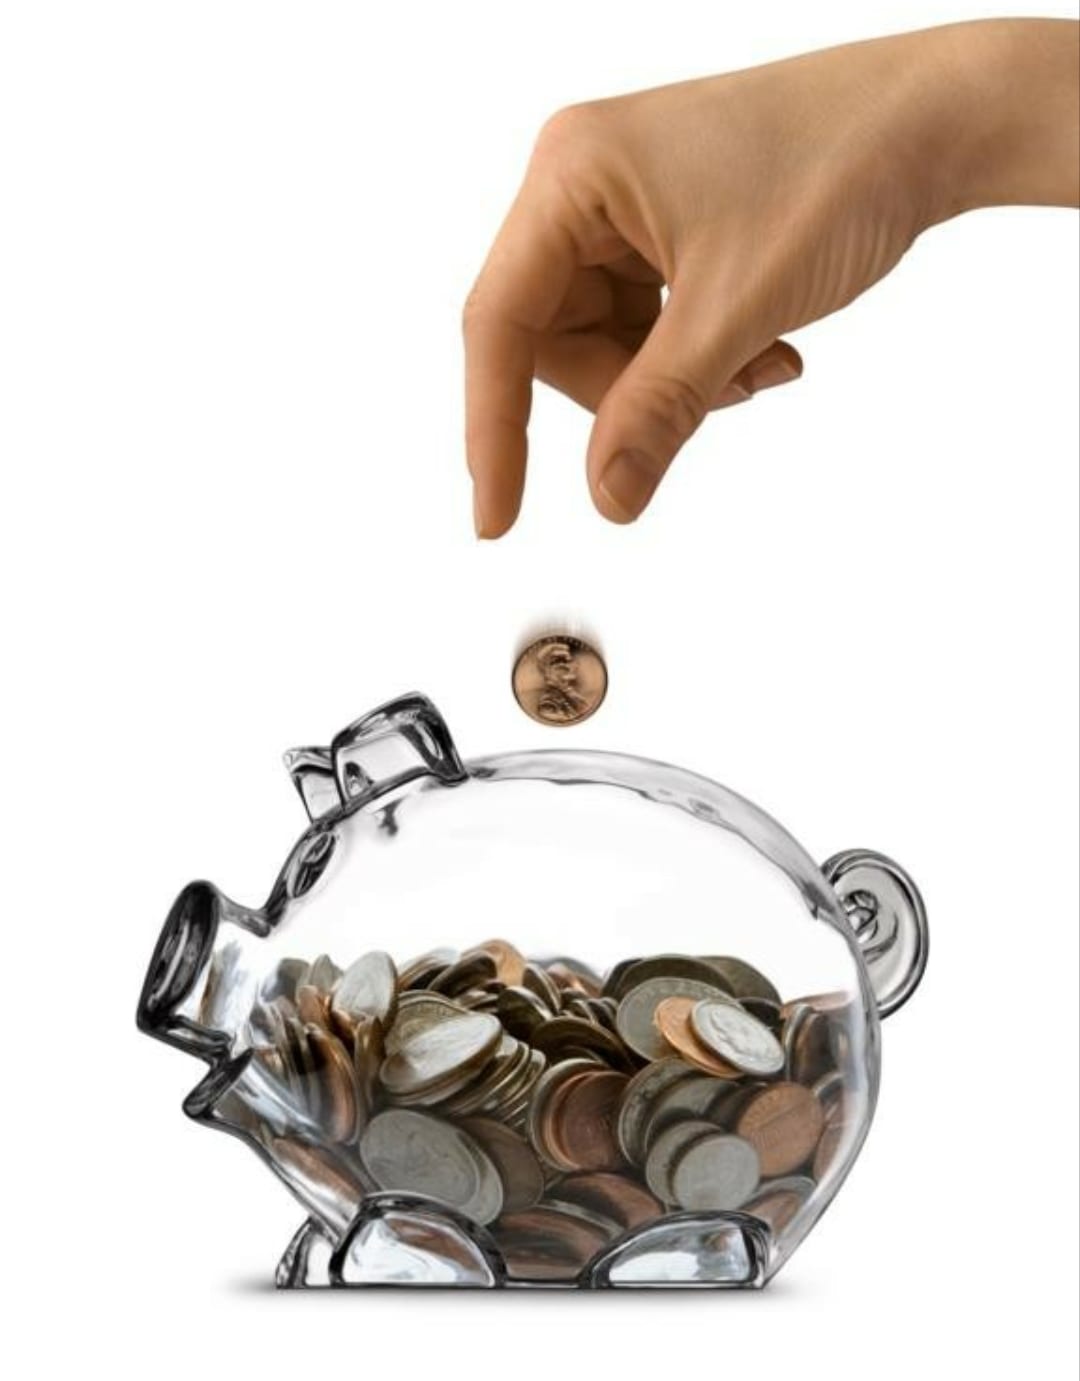 A person putting money in a glass jar